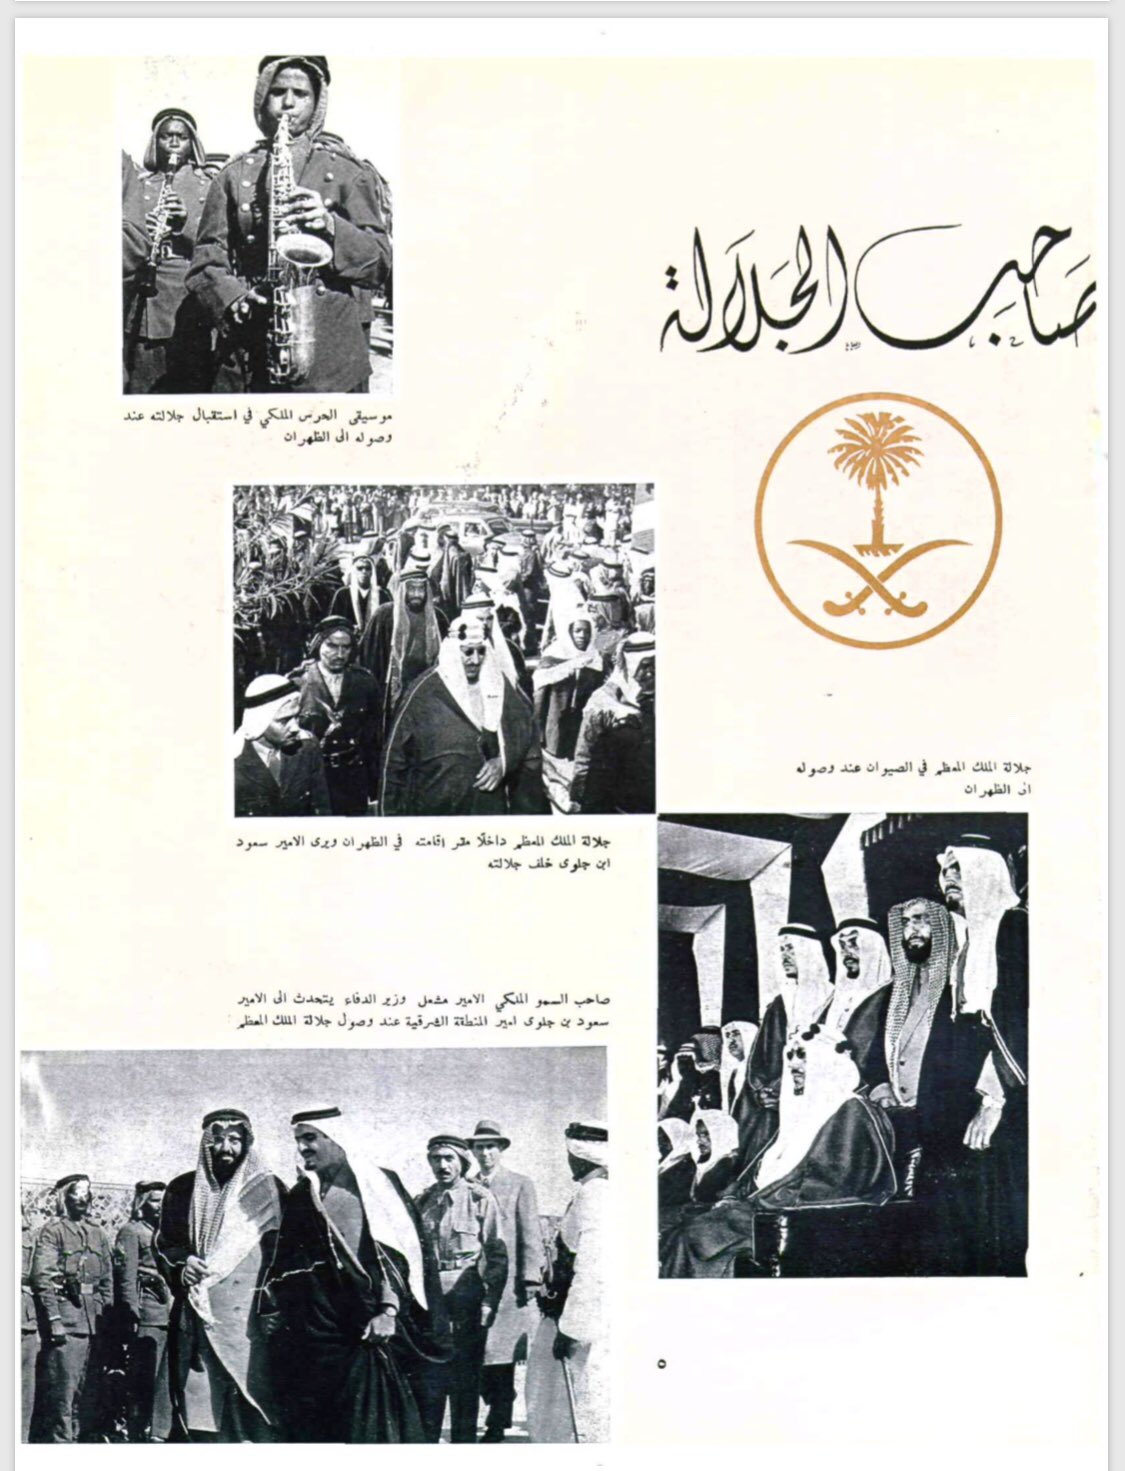 King Saud during his visit to the Eastern Province